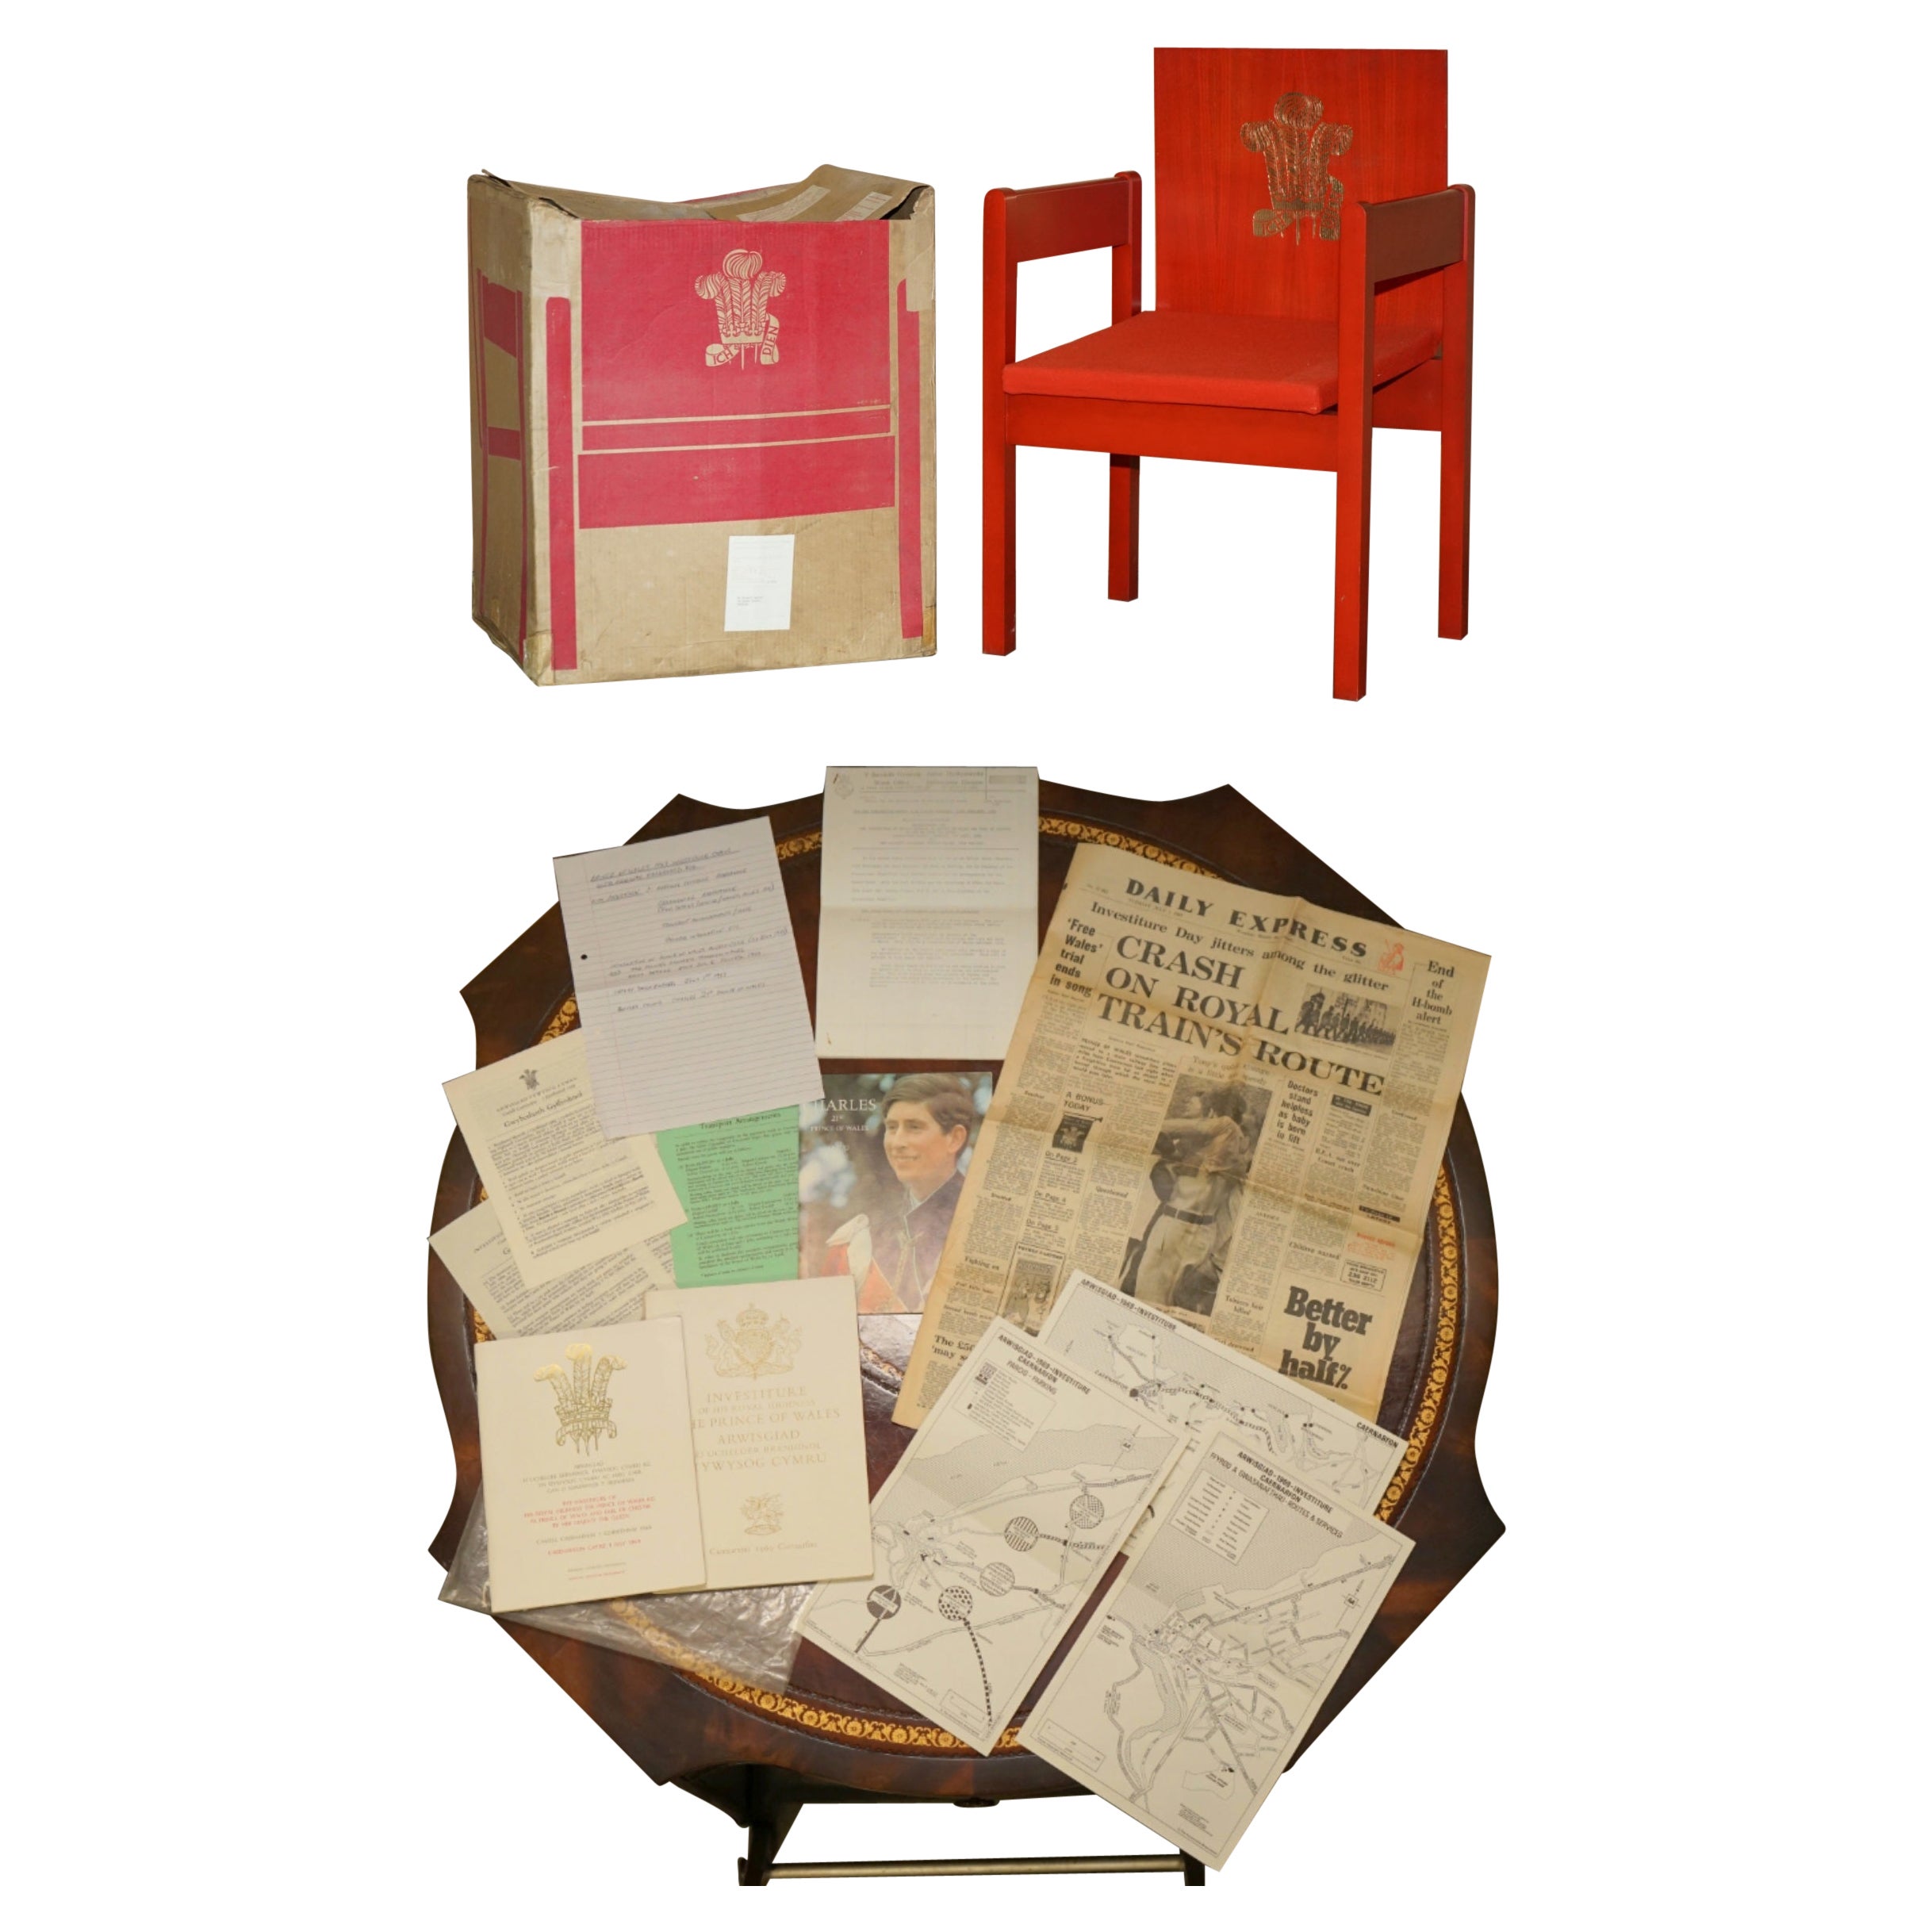 LAST OF ITS KIND BRAND NEW IN THE BOX 1969 PRINCE CHARLES INVESTITURE ARMCHAiR For Sale